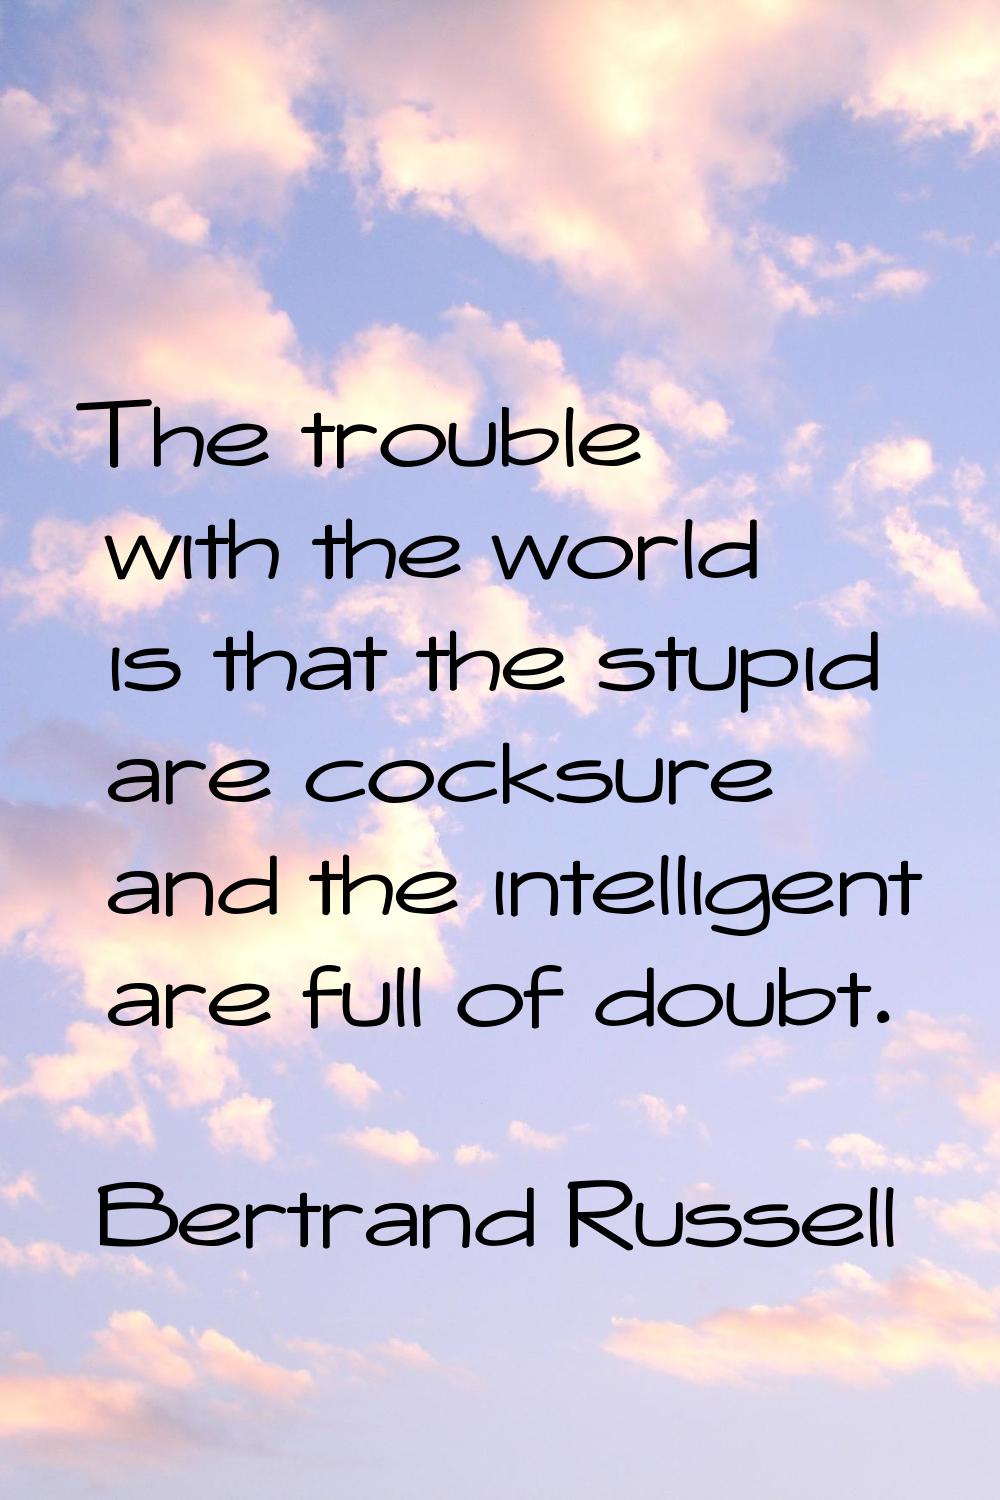 The trouble with the world is that the stupid are cocksure and the intelligent are full of doubt.